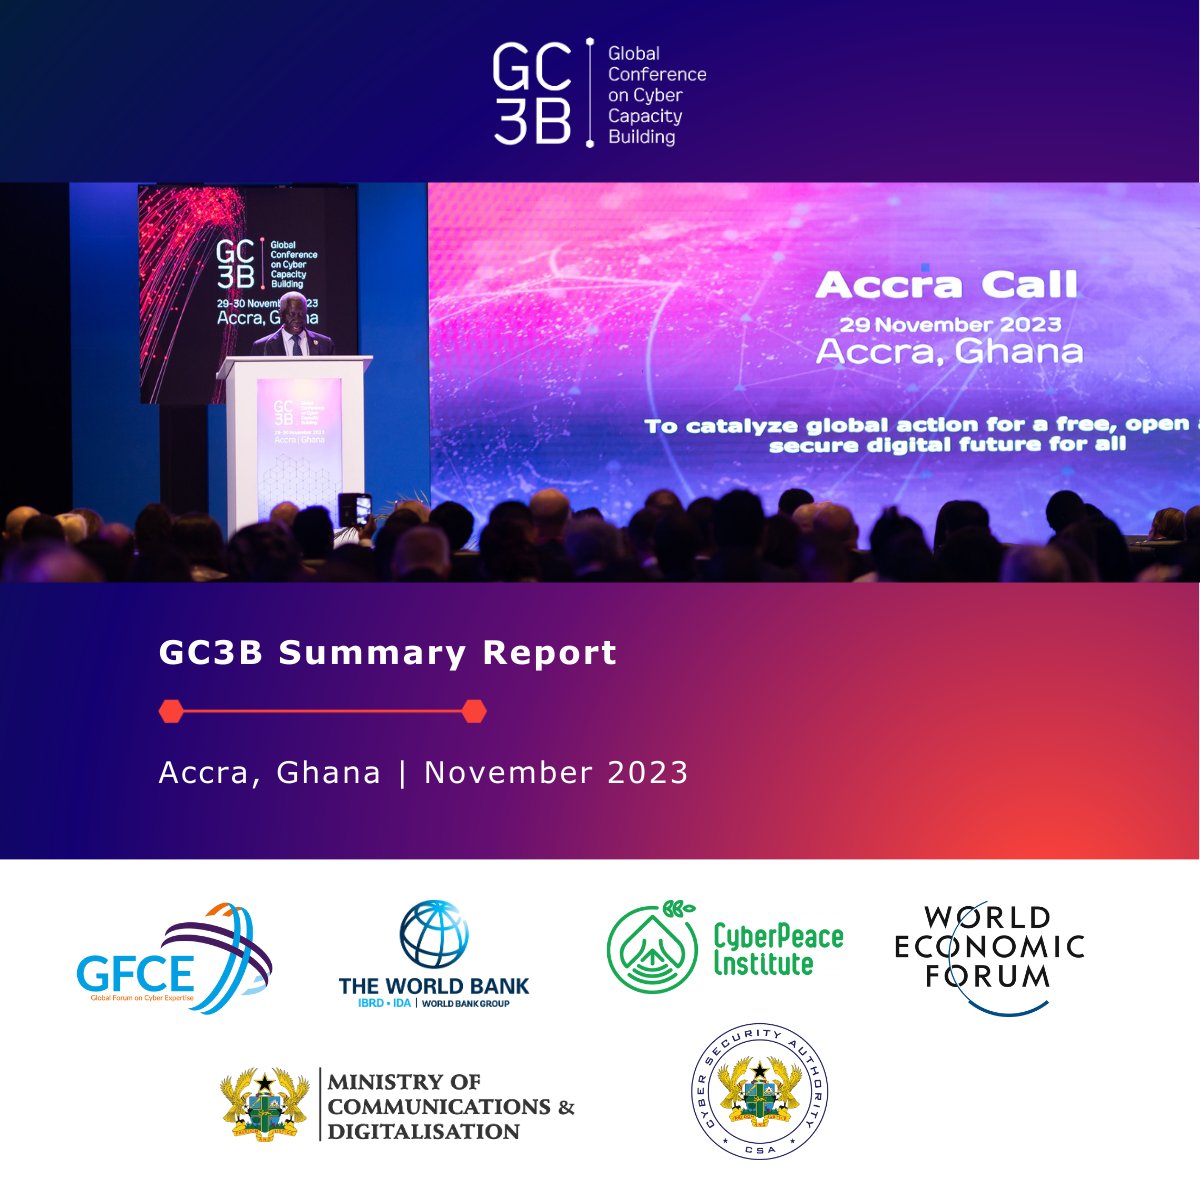 📢We are delighted to share the #GC3B23 Summary Report!

It provides a summary of the insightful discussions held at the conference, enriched by over 100+ speakers from the #cyber #capacitybuilding and #development communities

🌐Read the full report now: gc3b.org/news/gc3b-2023…